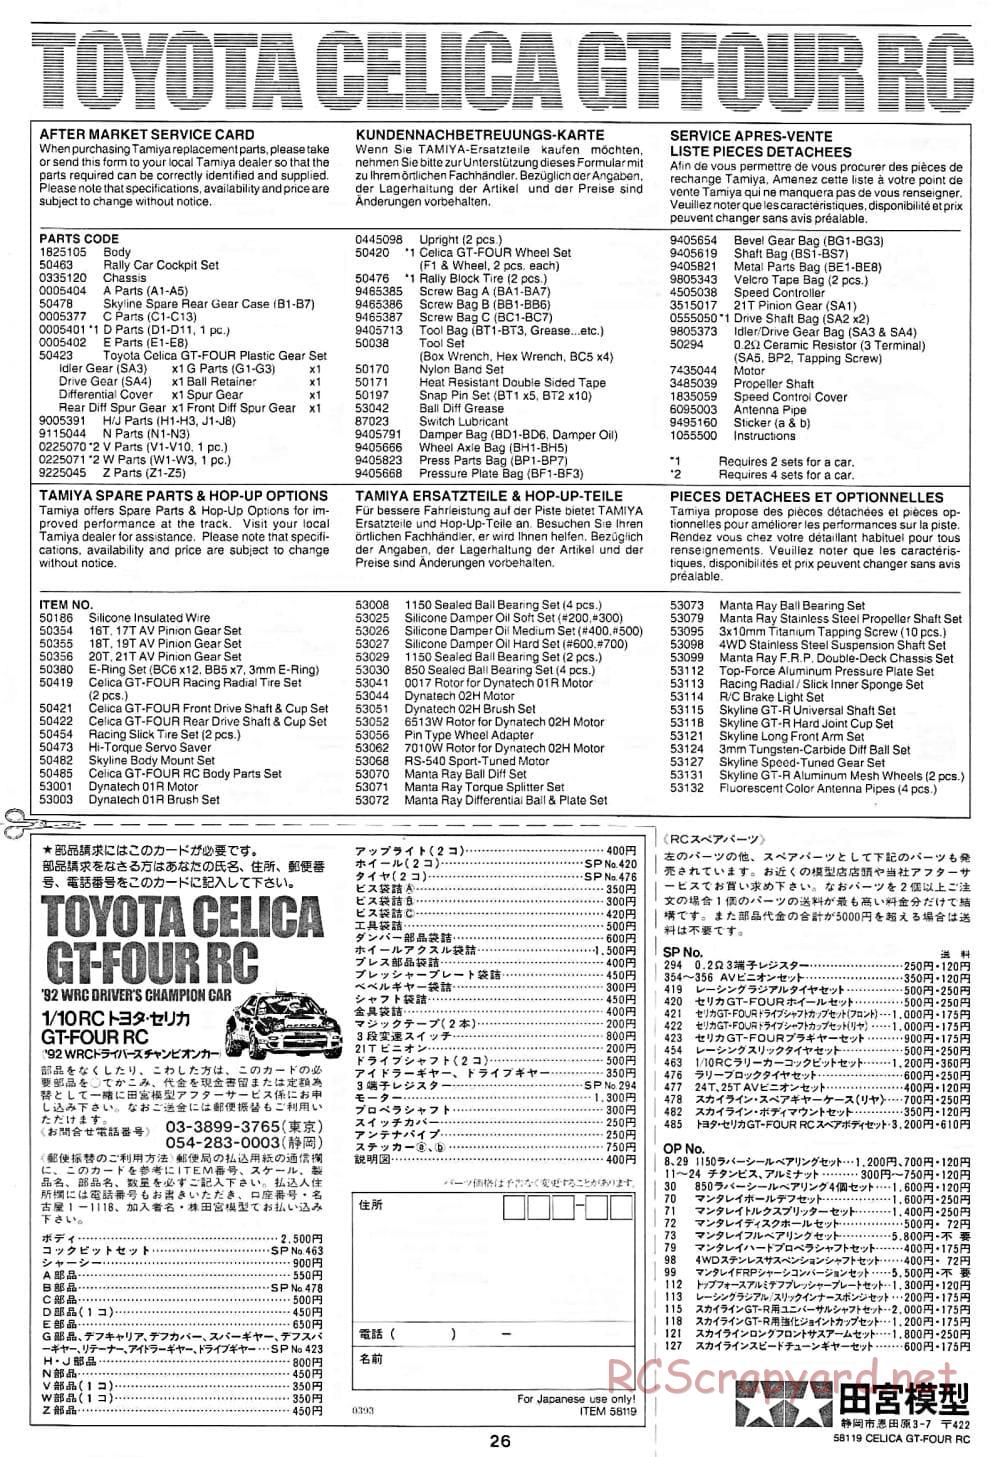 Tamiya - Toyota Celica GT-Four RC - TA-01 Chassis - Manual - Page 26